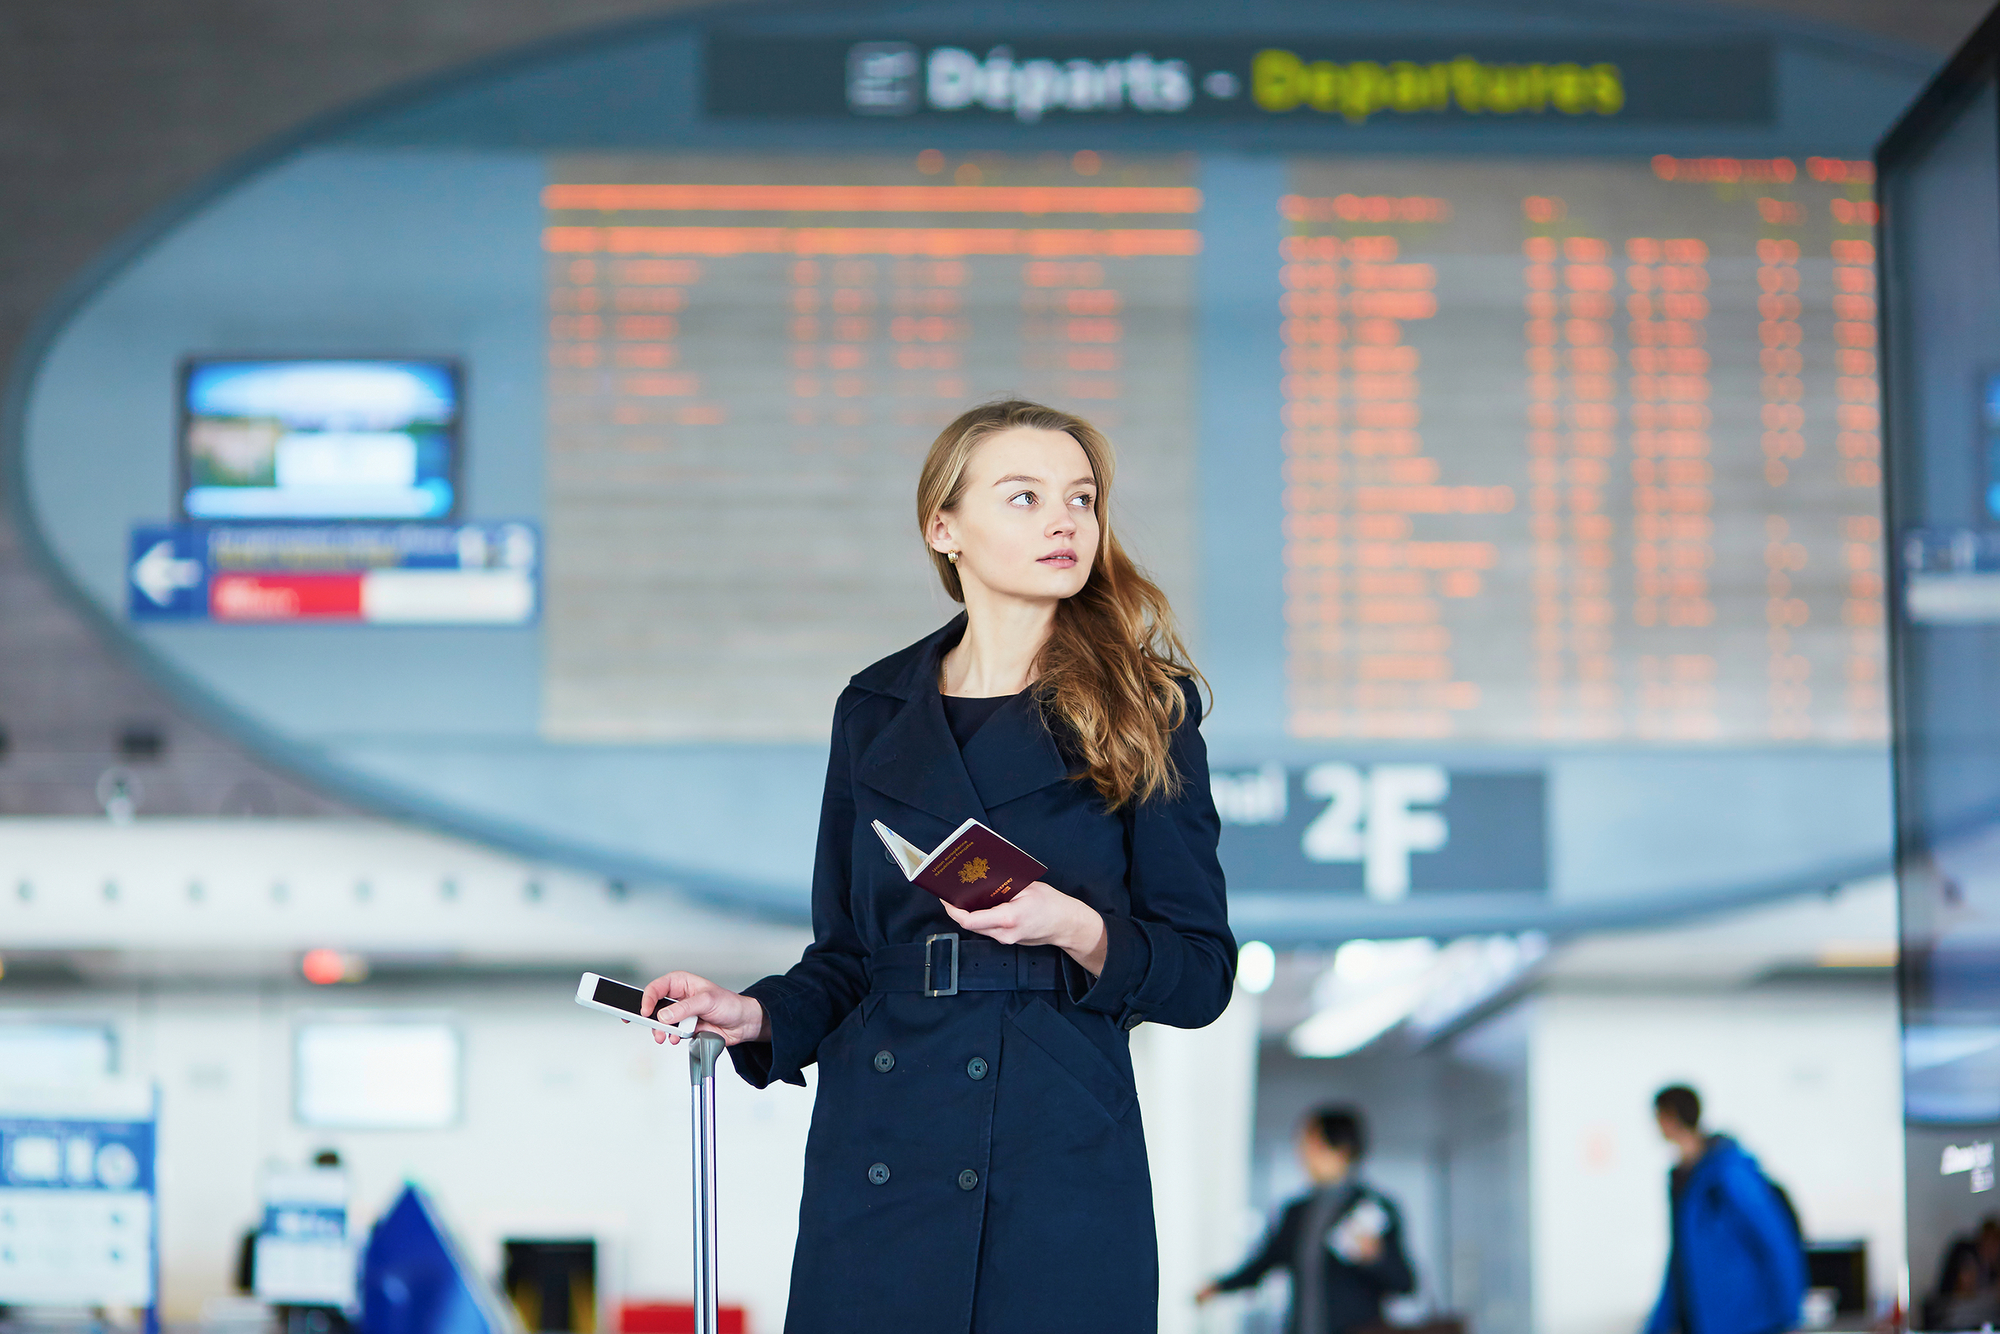 Young woman in international airport near the flight information board, holding French passport in her hand